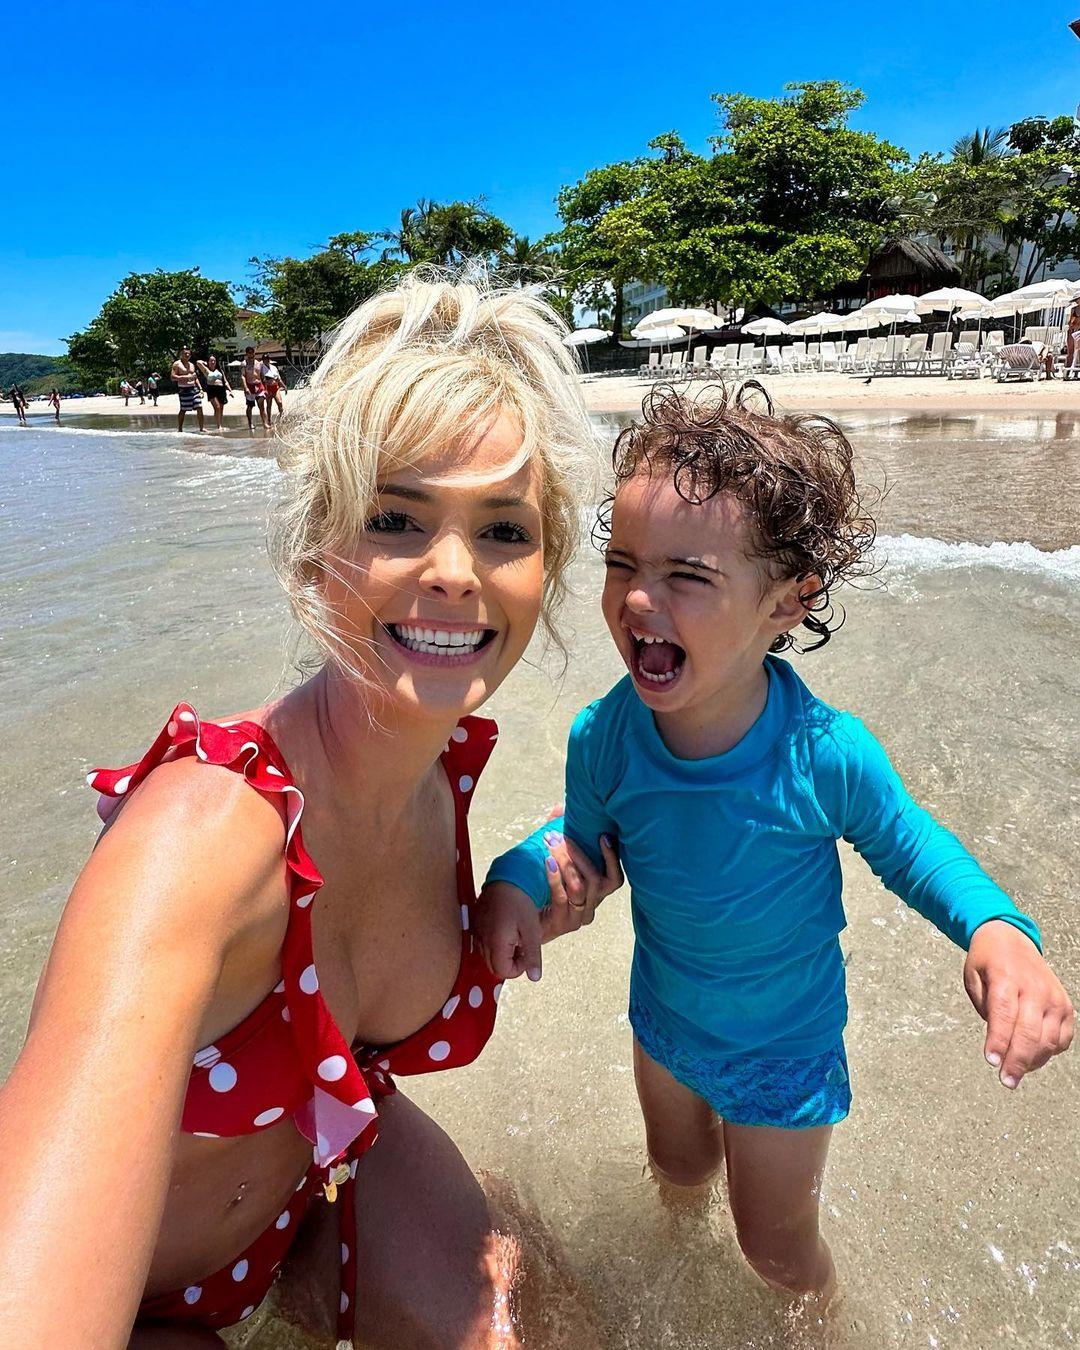 Jhenny Andrade and her son smiling.